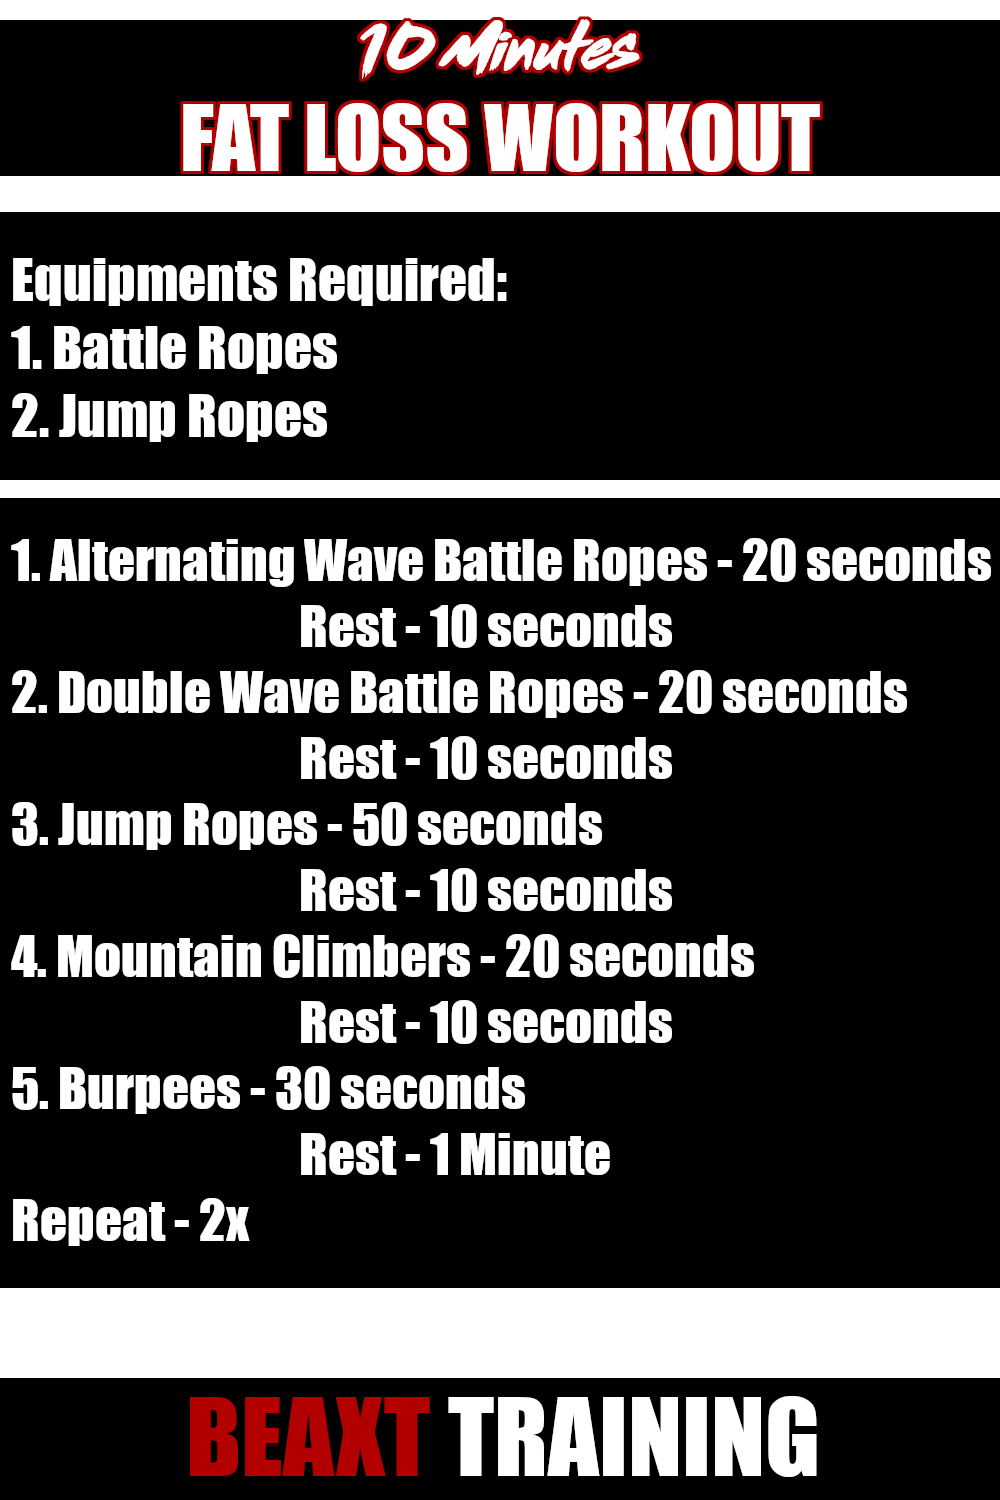 10 MINUTES FAT BURNING WORKOUT with Battle Ropes and Jump Ropes